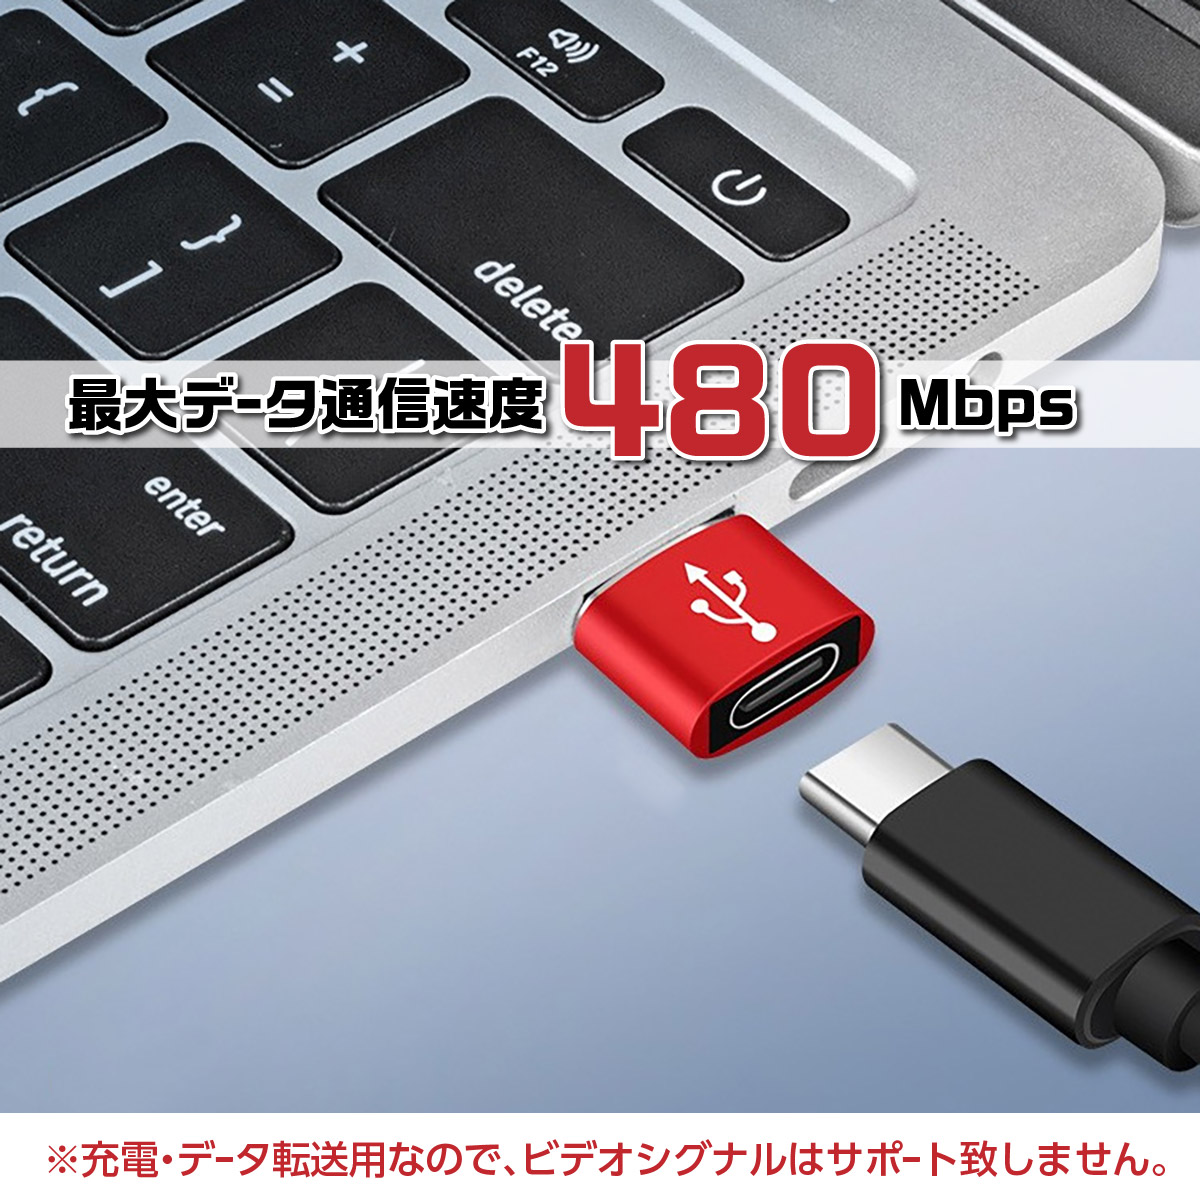 Type-C 変換アダプター USB Type-A 充電器 タイプC to USBタイプA iPhone スマホ HDD SSD パソコン ハブ データ転送 コンパクト 小さい｜heureux｜10